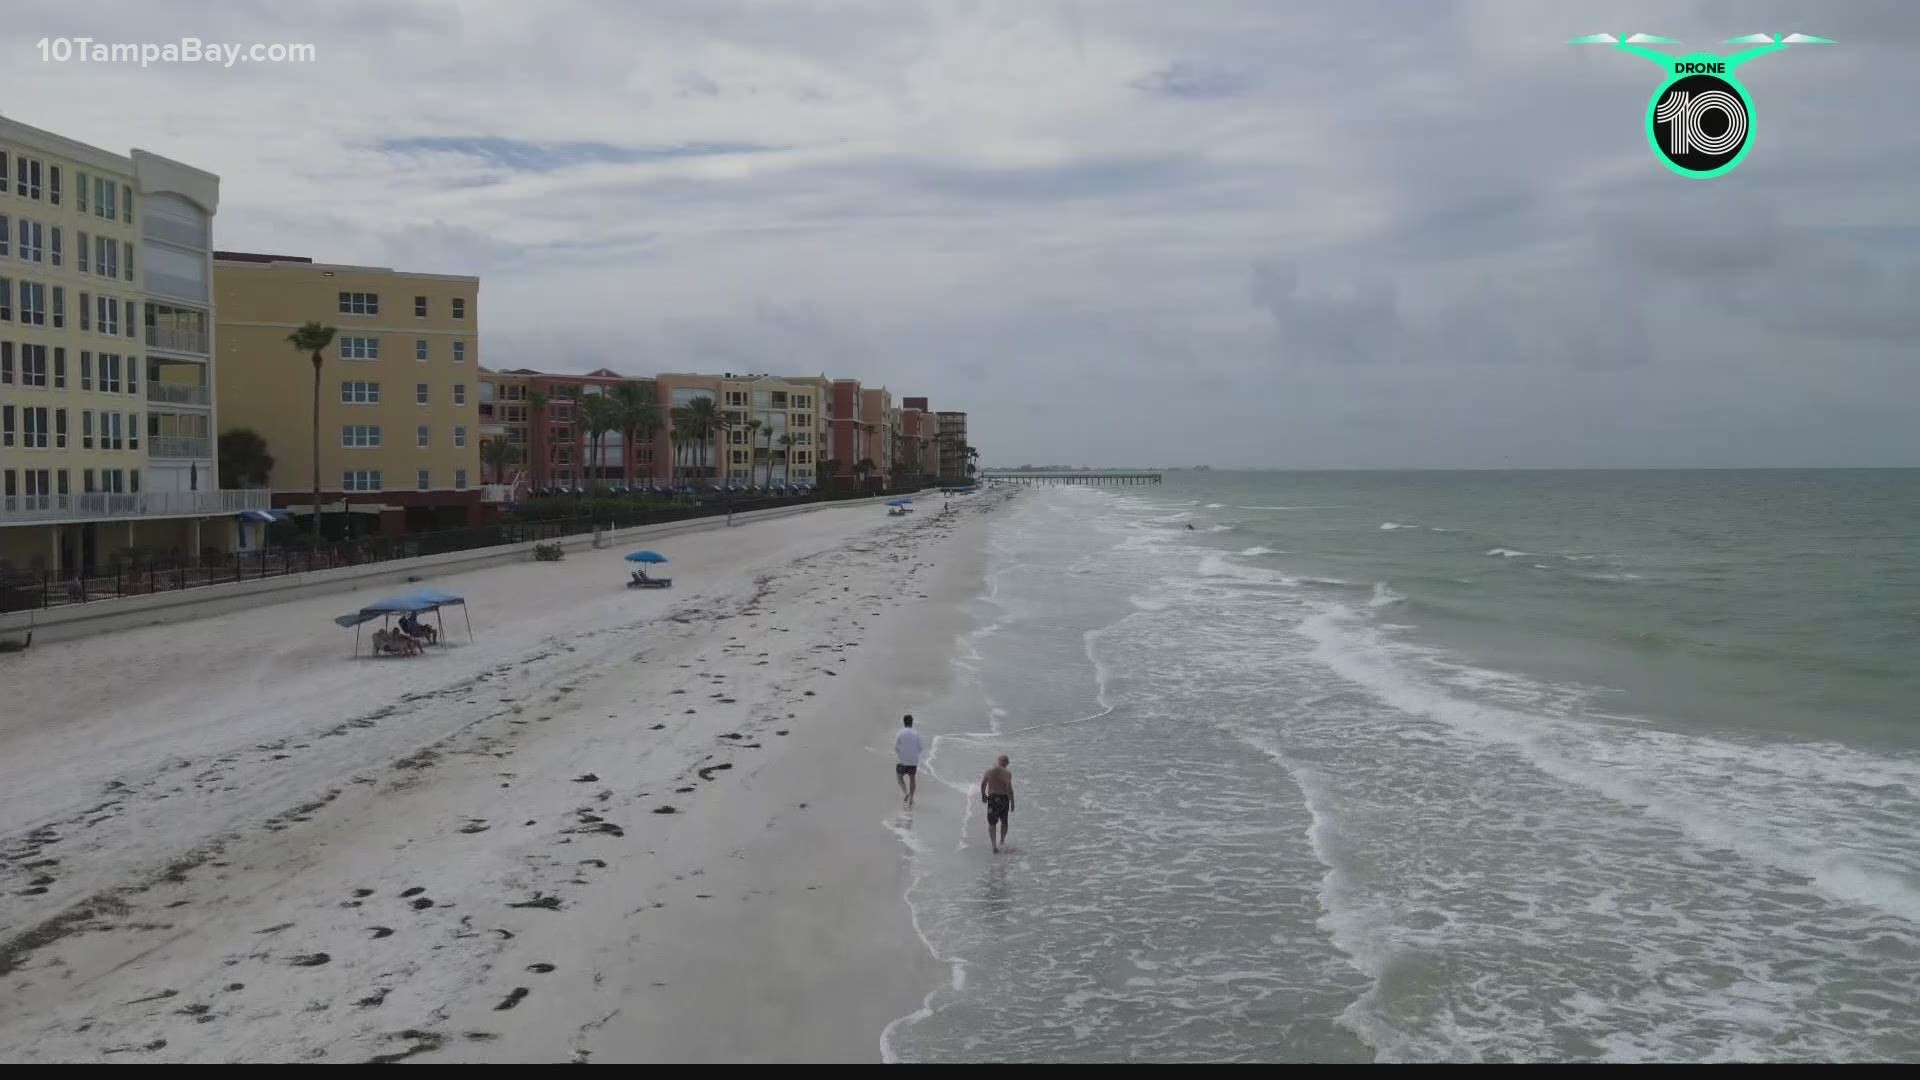 Water experts explained the storm will likely have some kind of impact on the current red tide concentrations in Tampa Bay.